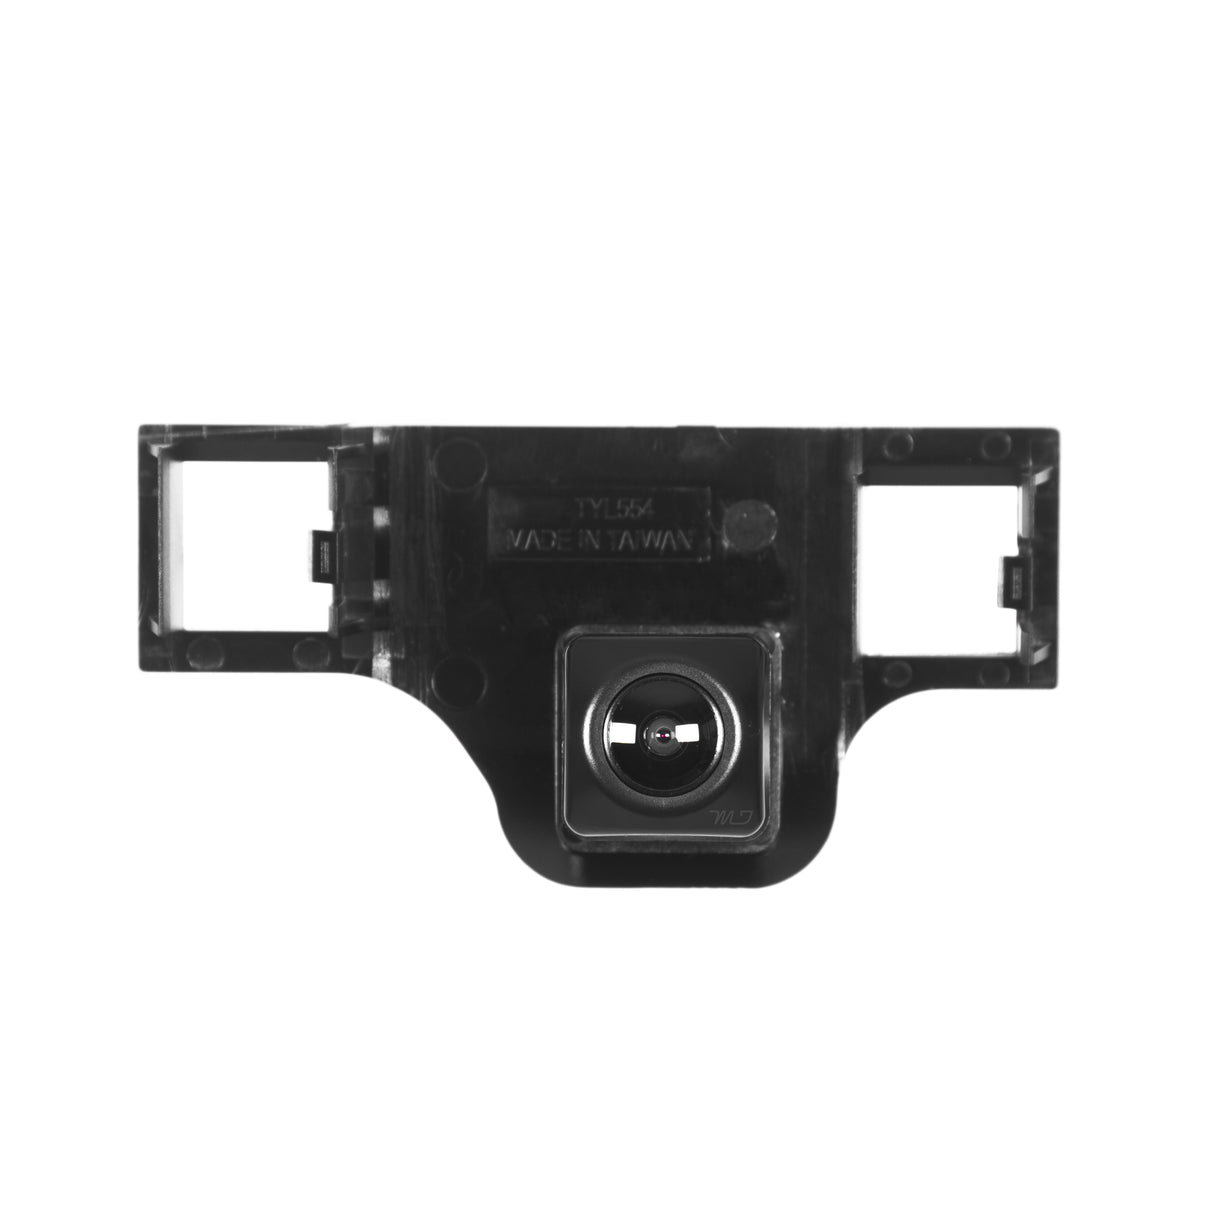 Toyota Sienna (2014-2018) OEM Replacement Backup Camera OE Part # 86790-08010